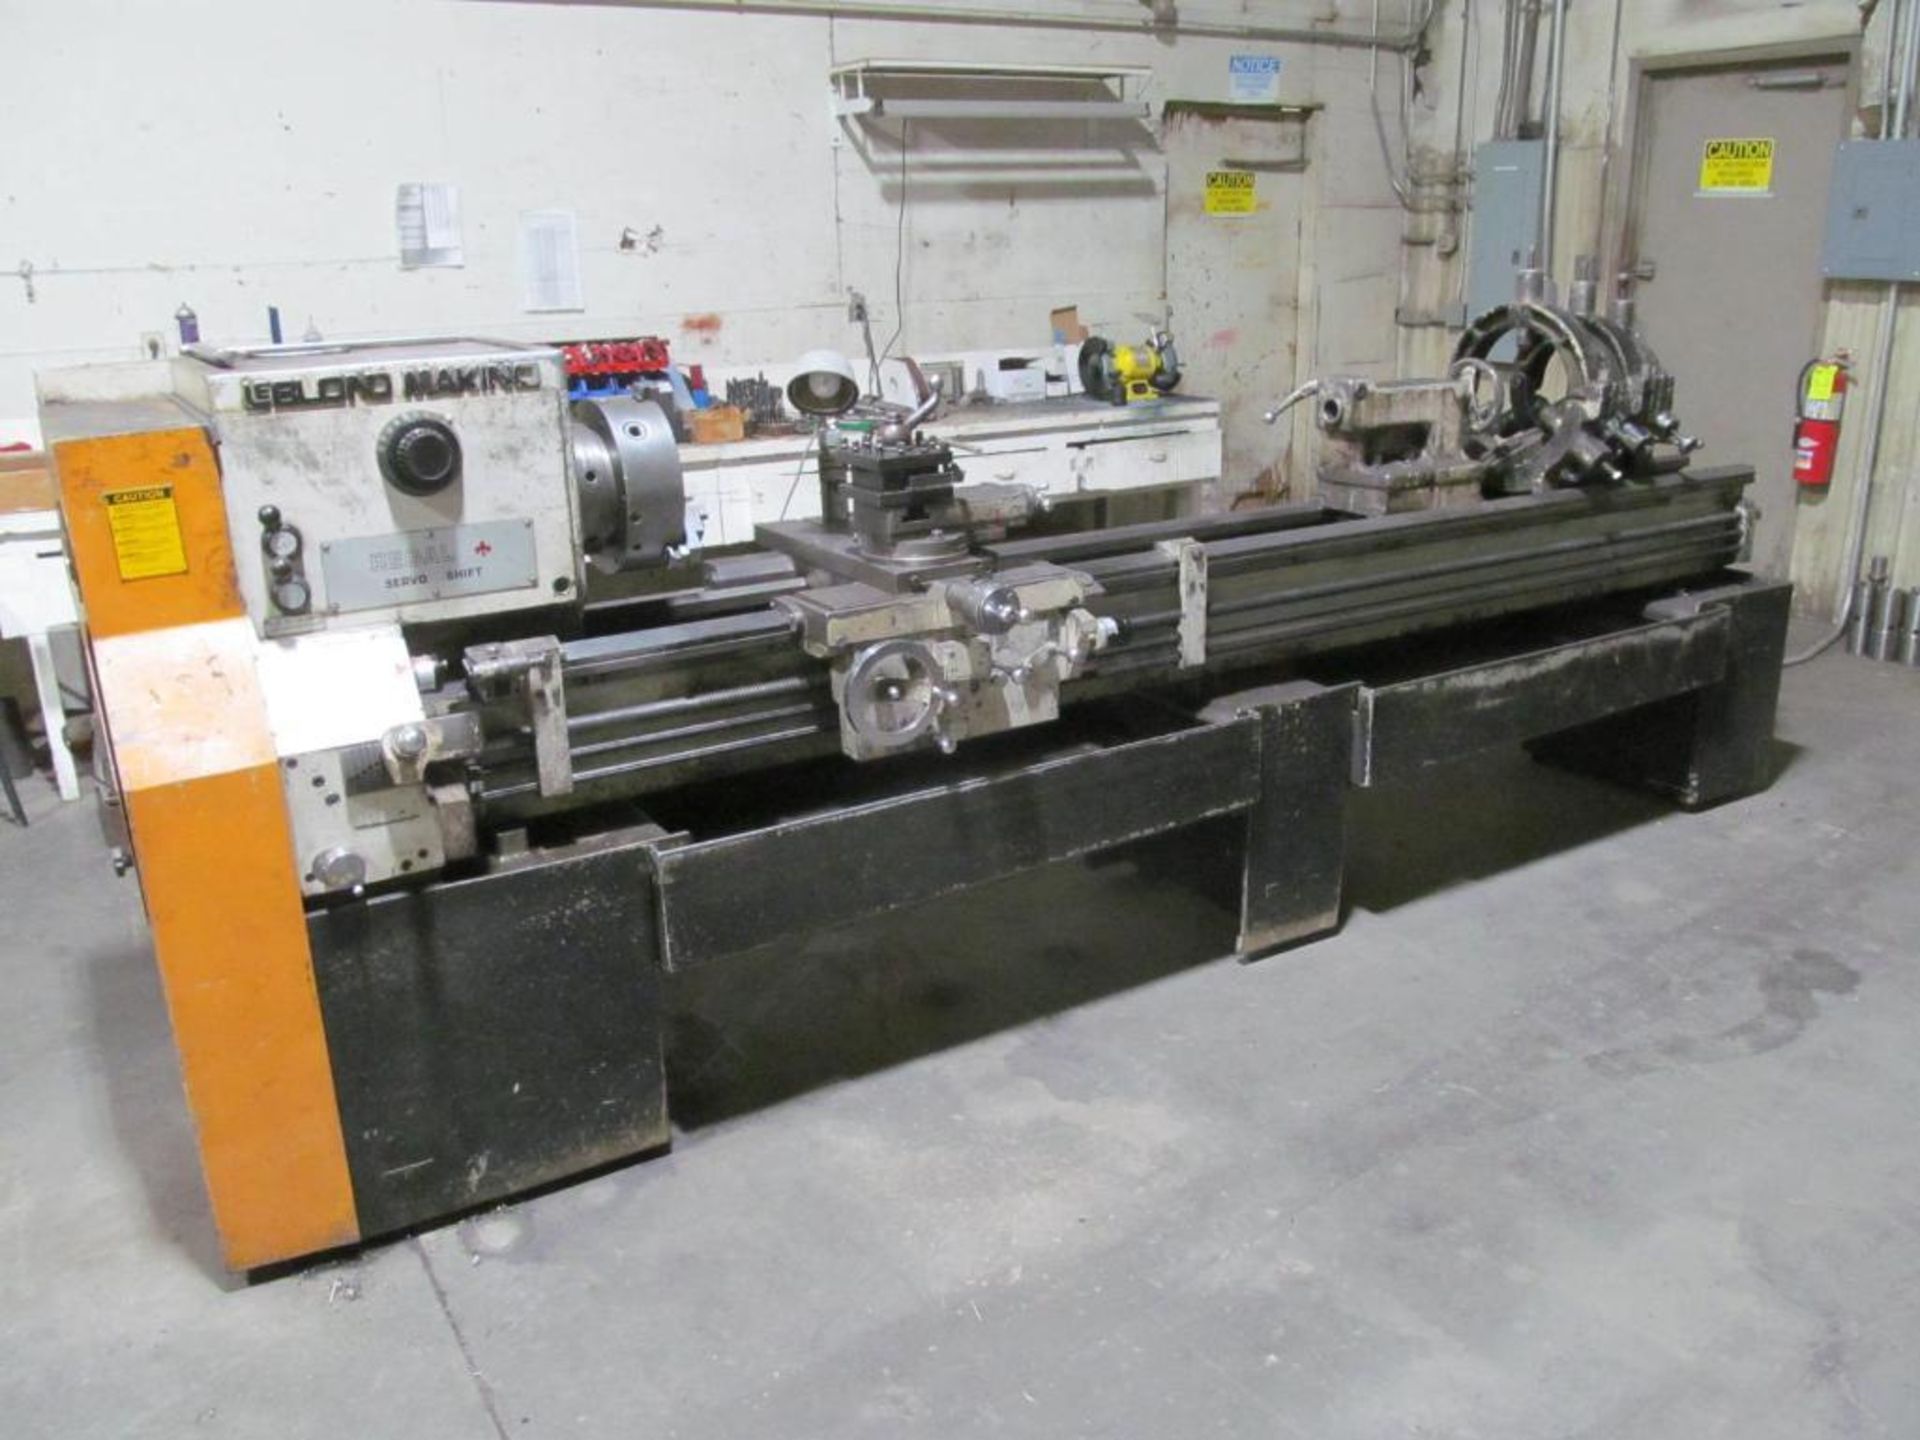 LeBlond-Regal Servo Shift 17" x 80" Engine Lathe, S/N 14E-669, 3" Spindle Hole, 40 to 1600-RPM, with